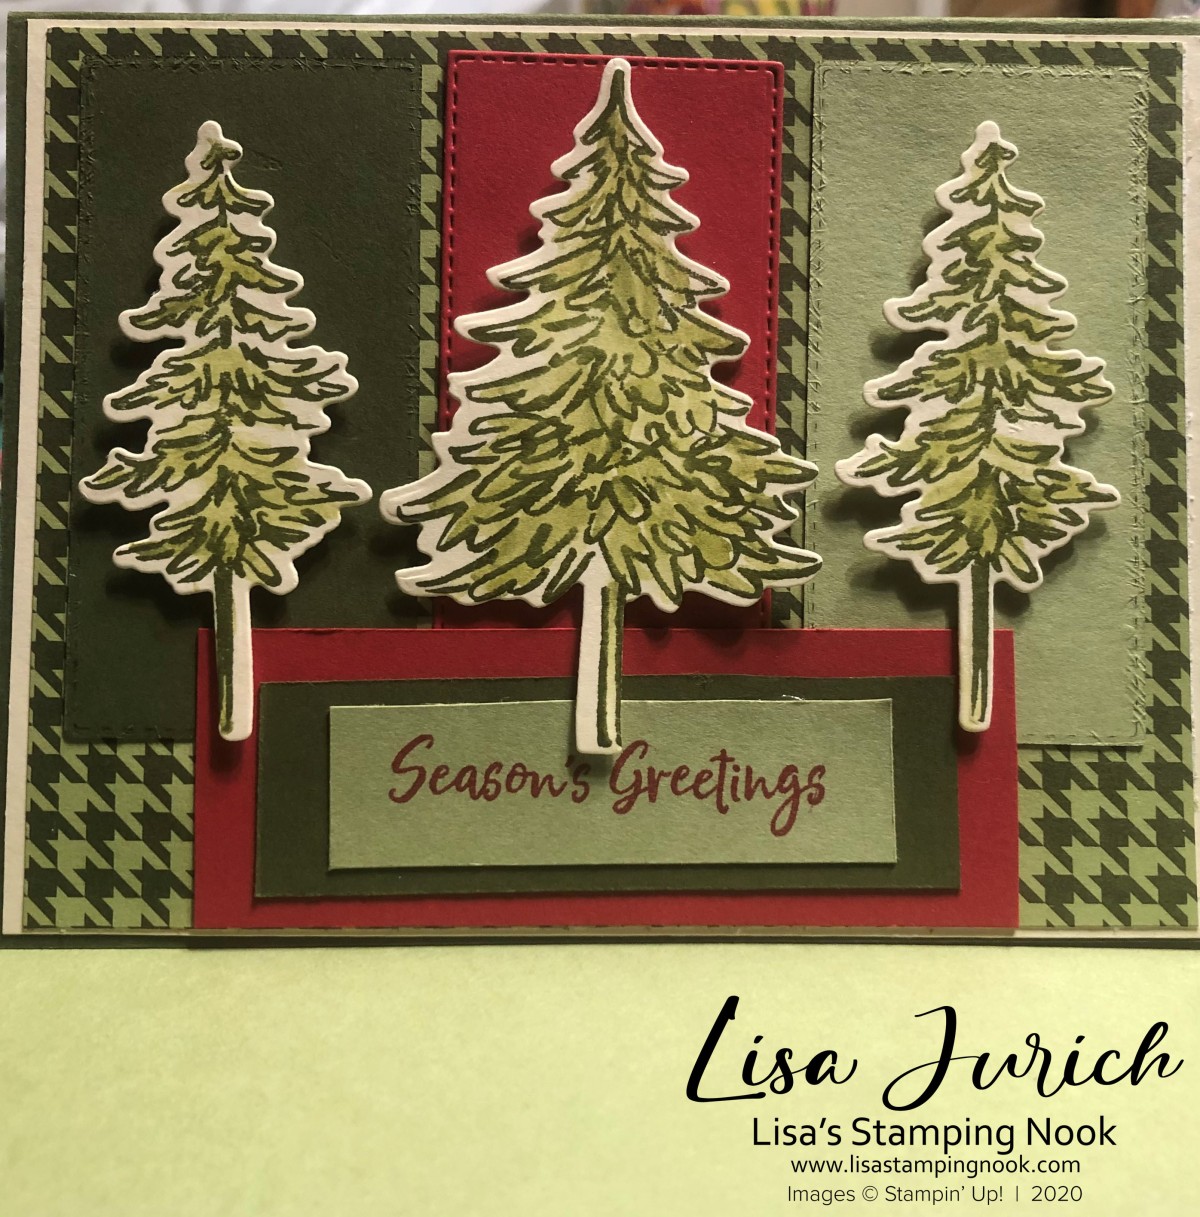 Stampin’ Up! In The Pines Seasons Greetings Card